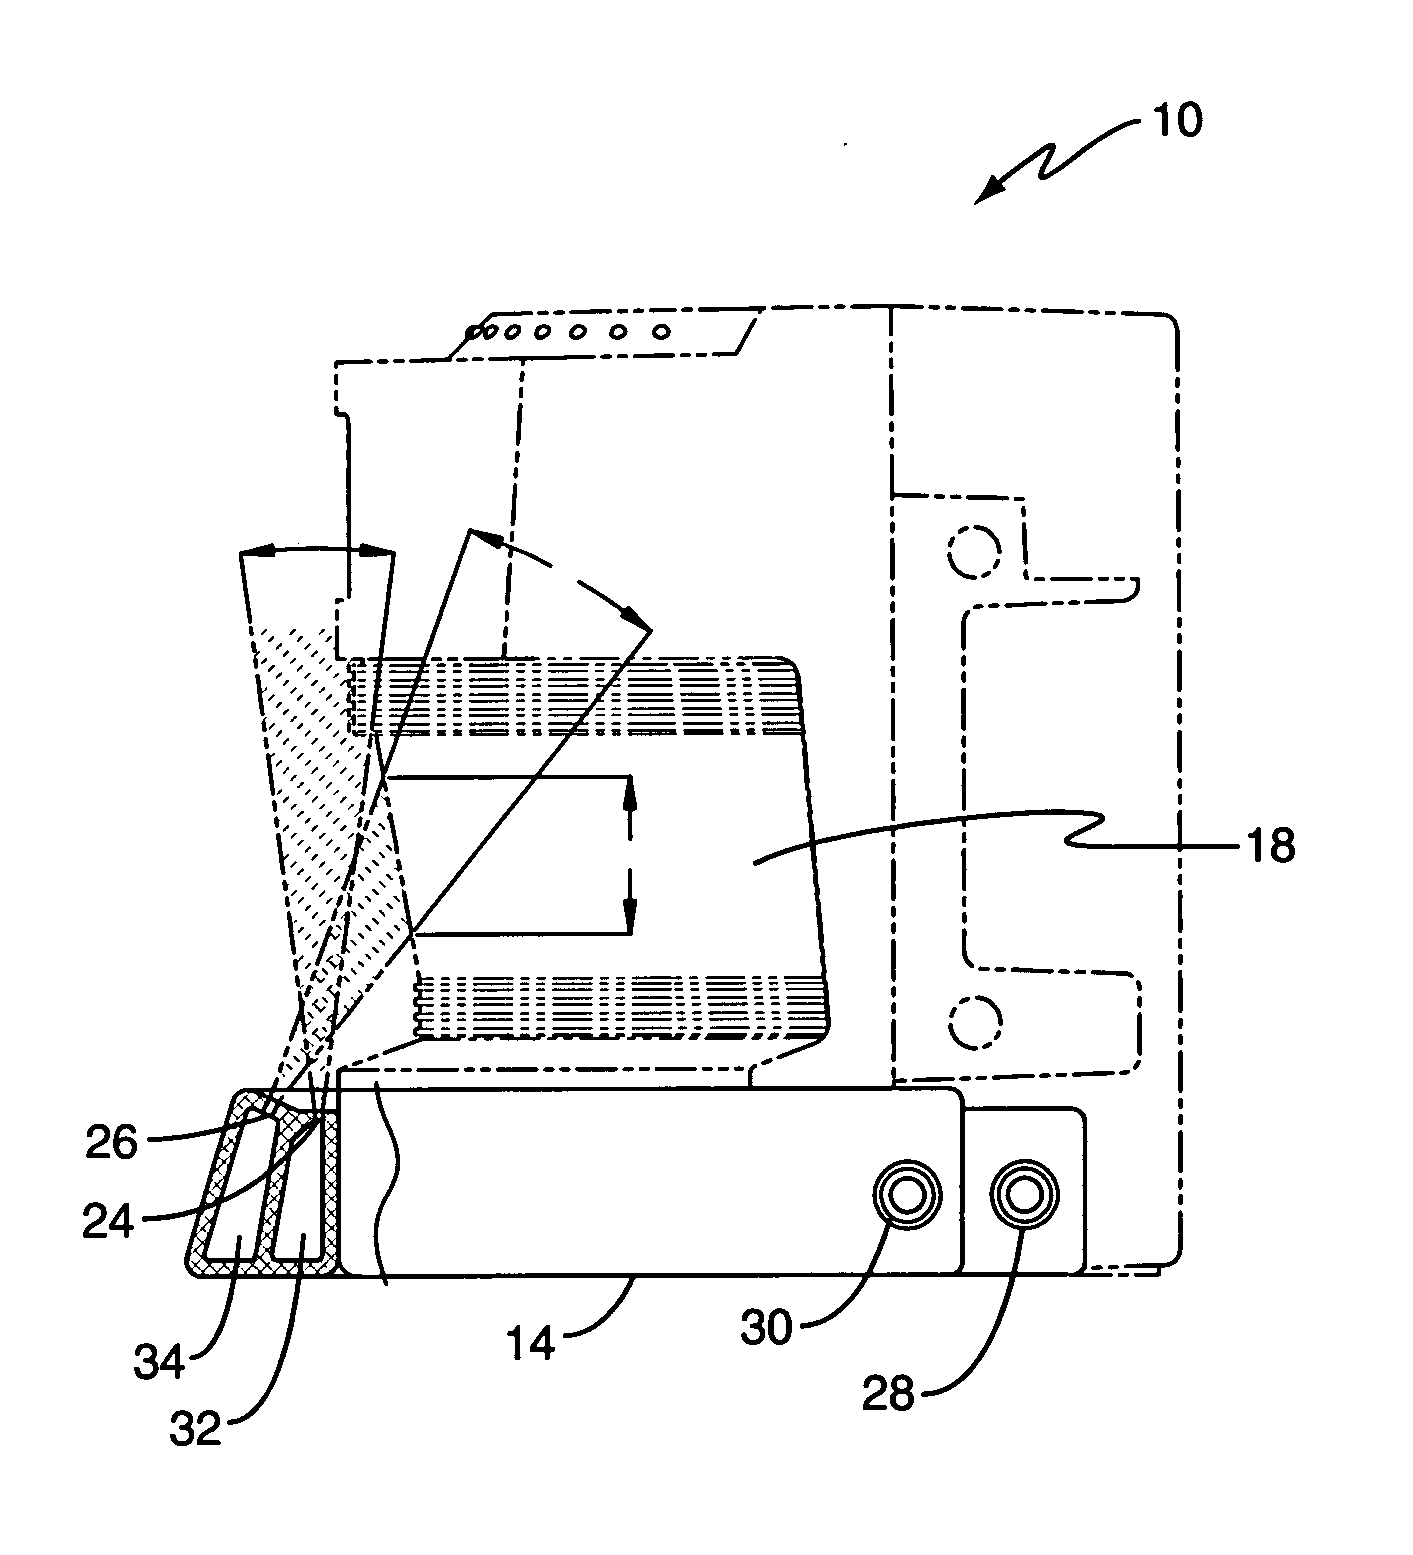 Apparatus and method for laser scanner cleaning and protection